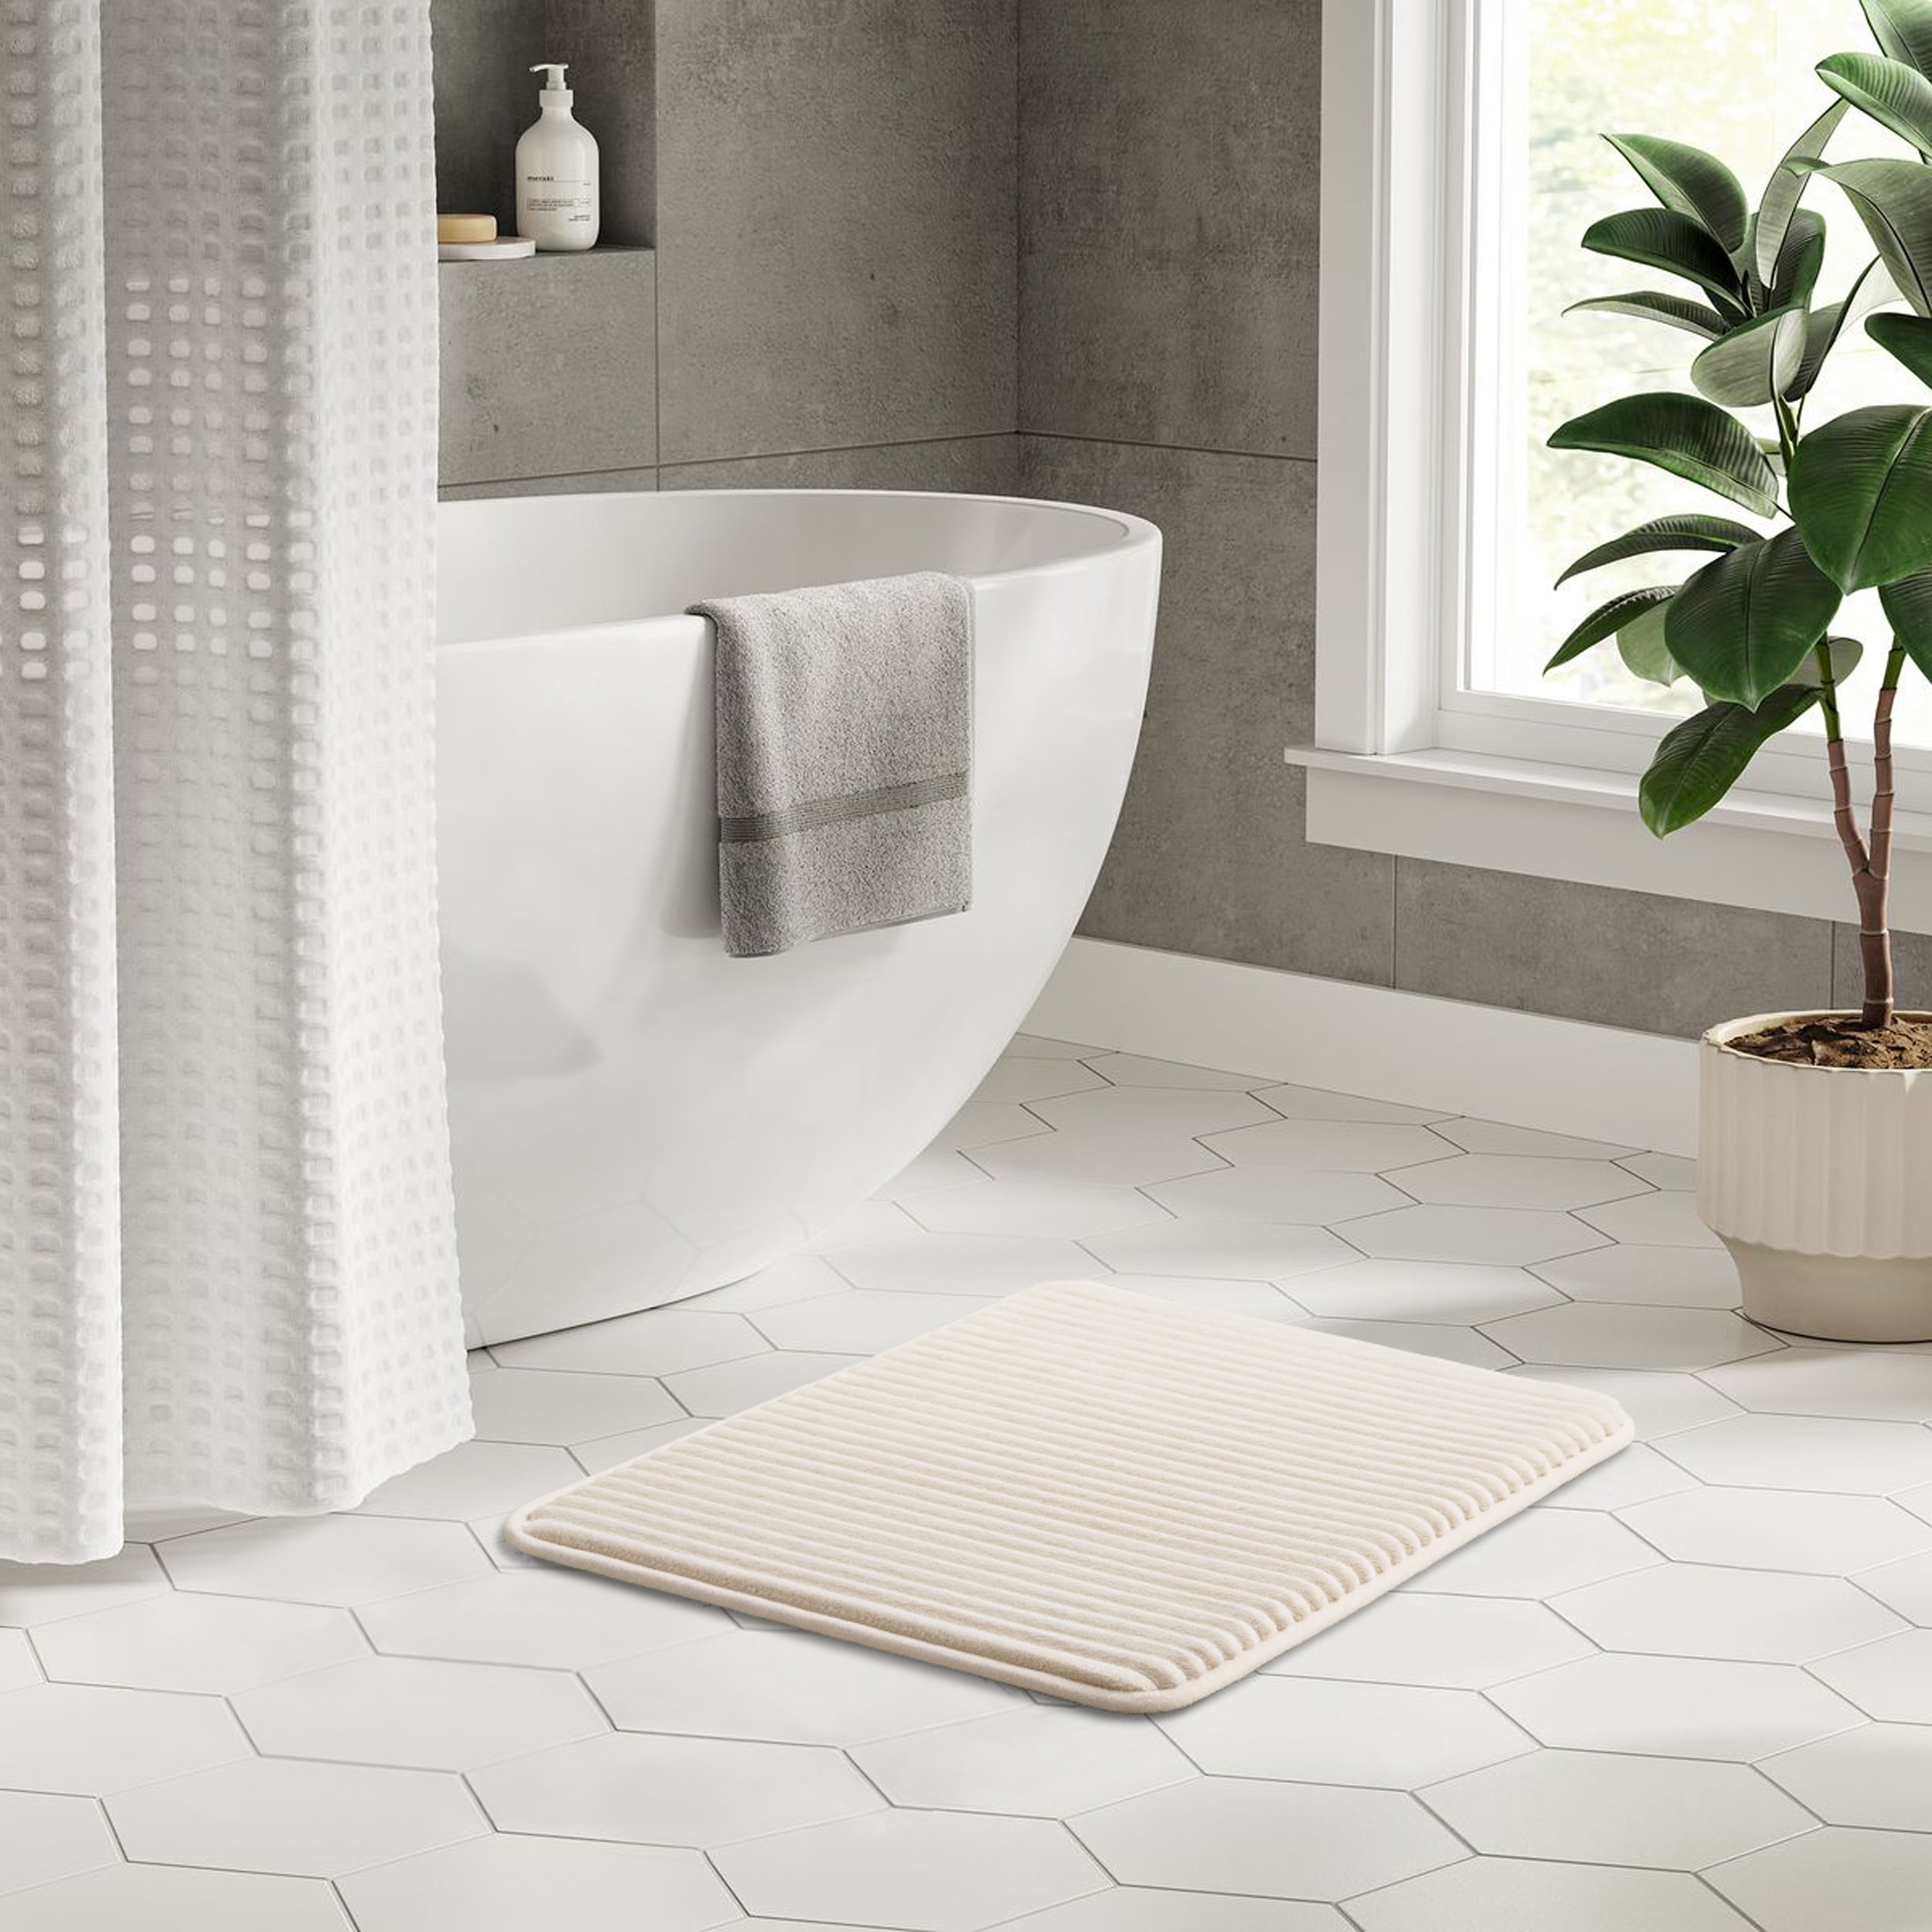 What's the bath rug that fits your shower stall? – High quality rugs  manufacturer, China wholesale bath mats supplier